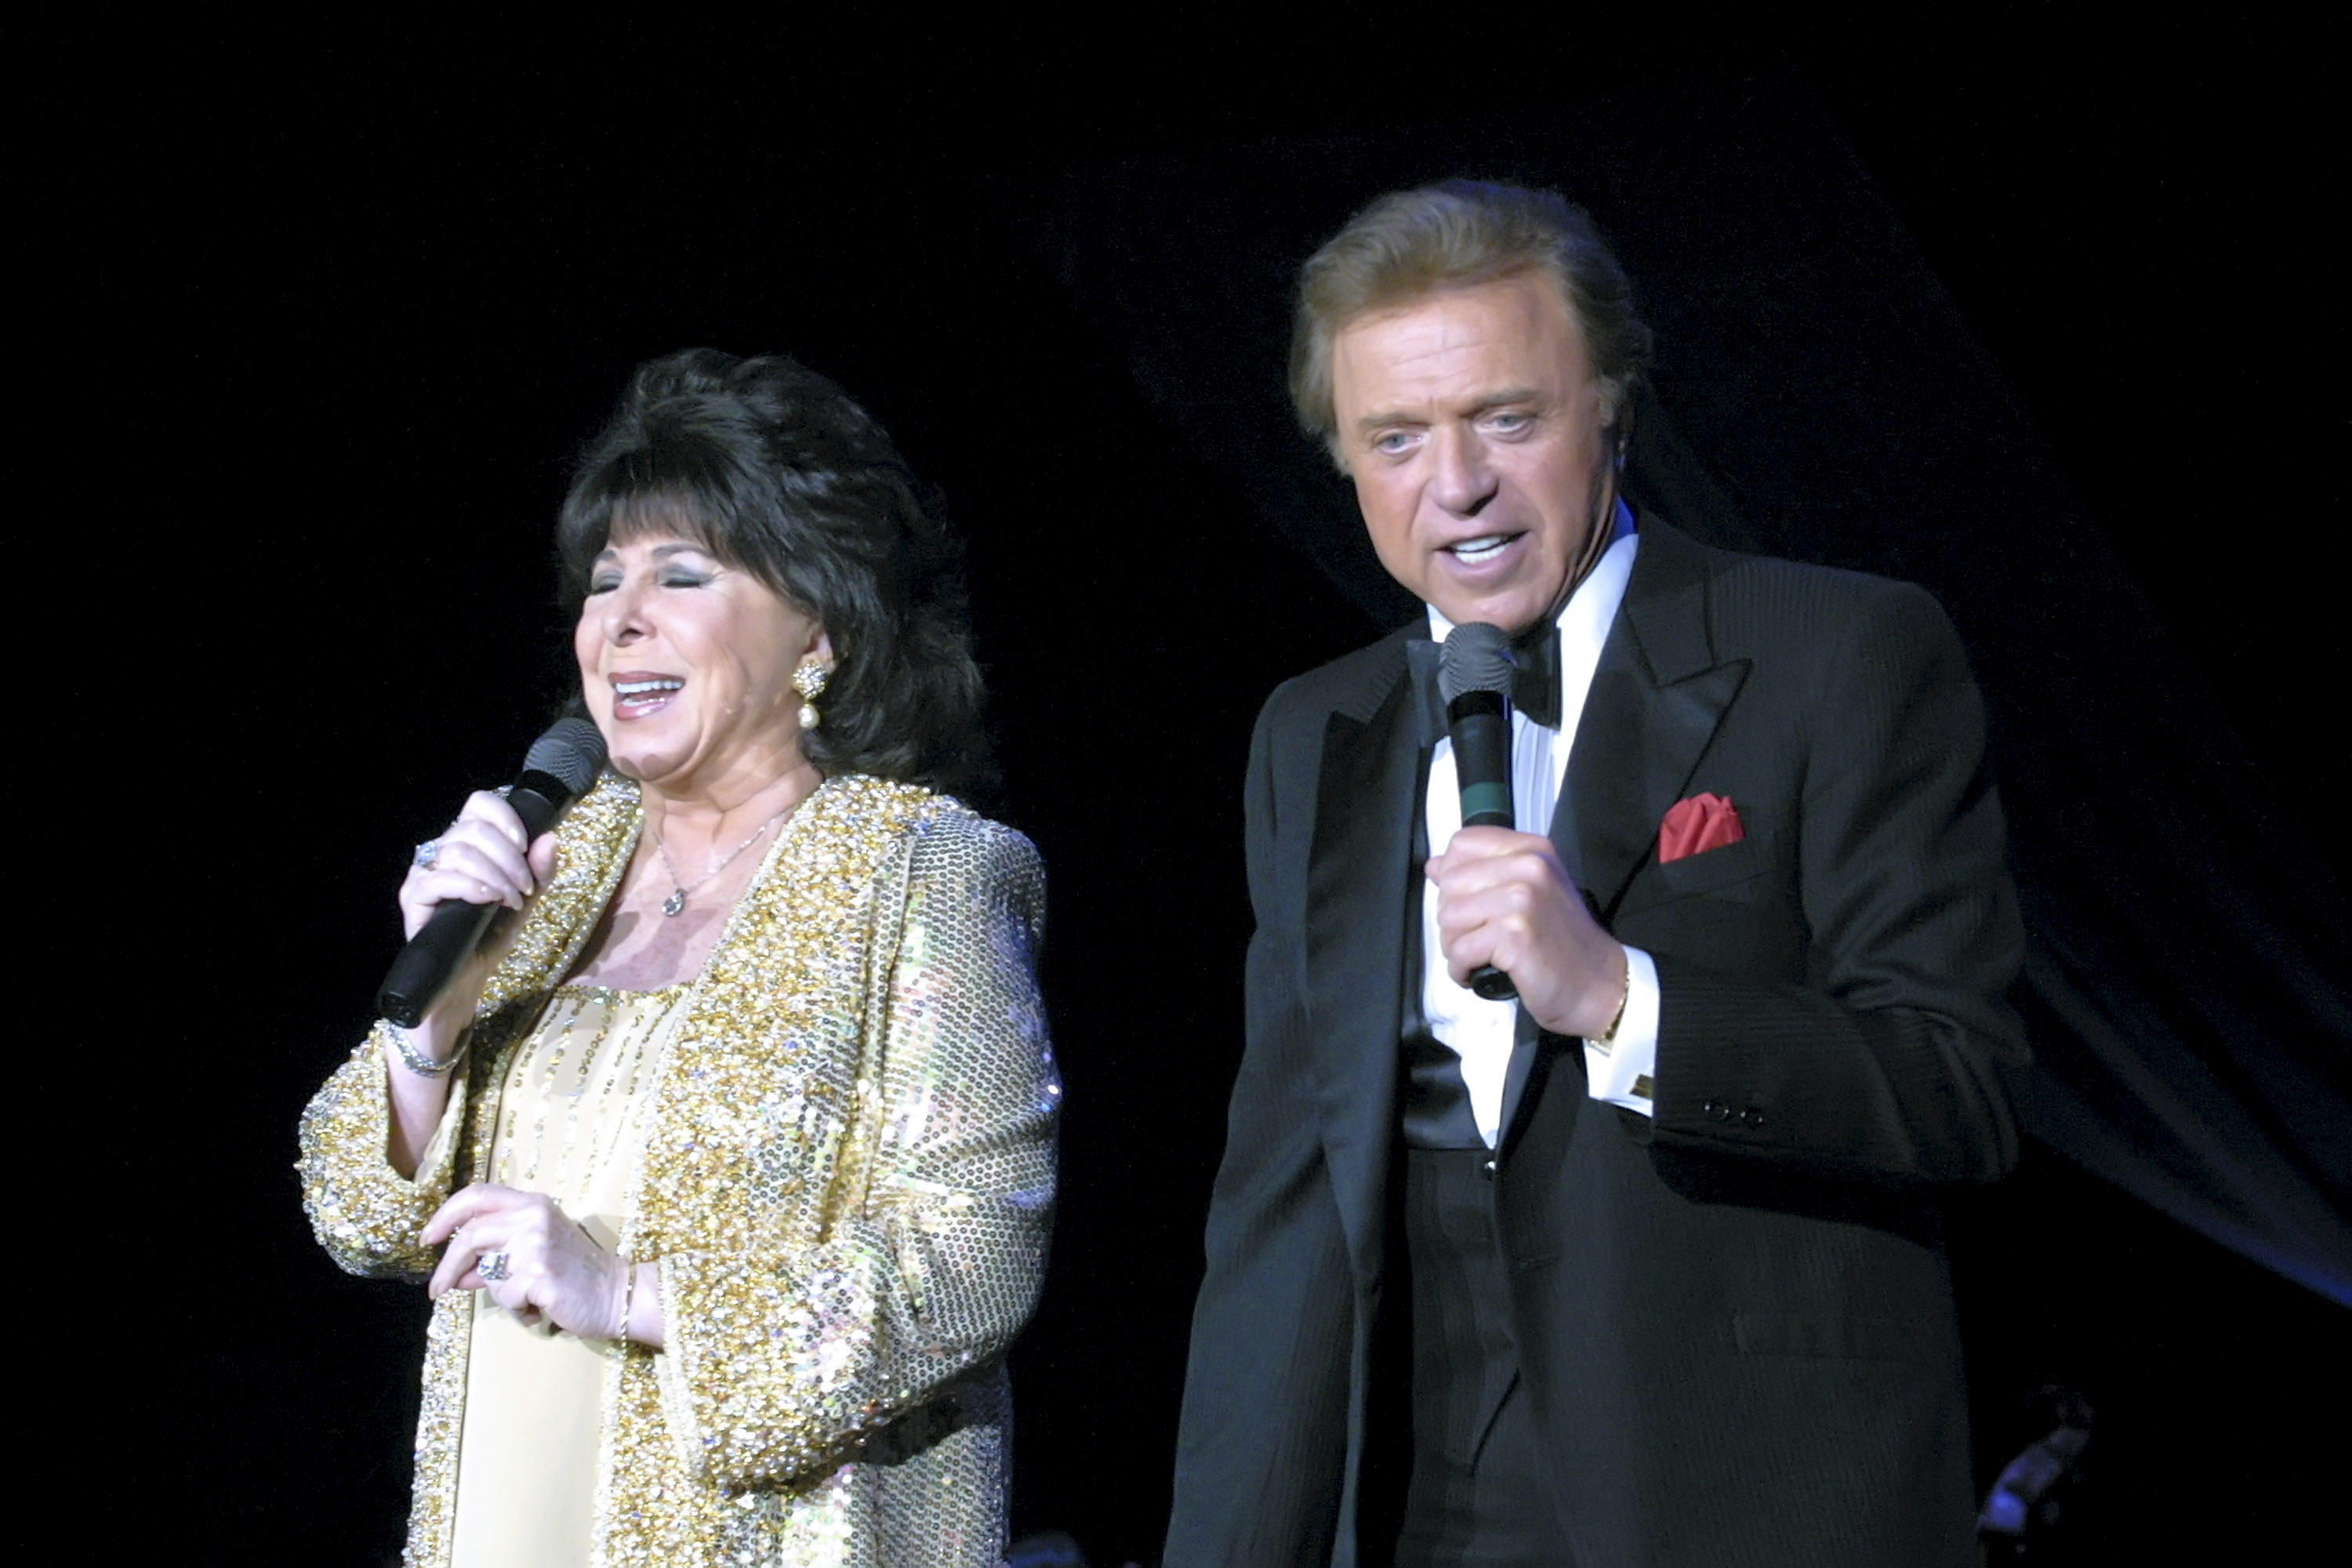 Eydie Gorme and Steve Lawrence performs at Resorts Casino in Atlantic City on March 5, 2001. | Source: Getty Images